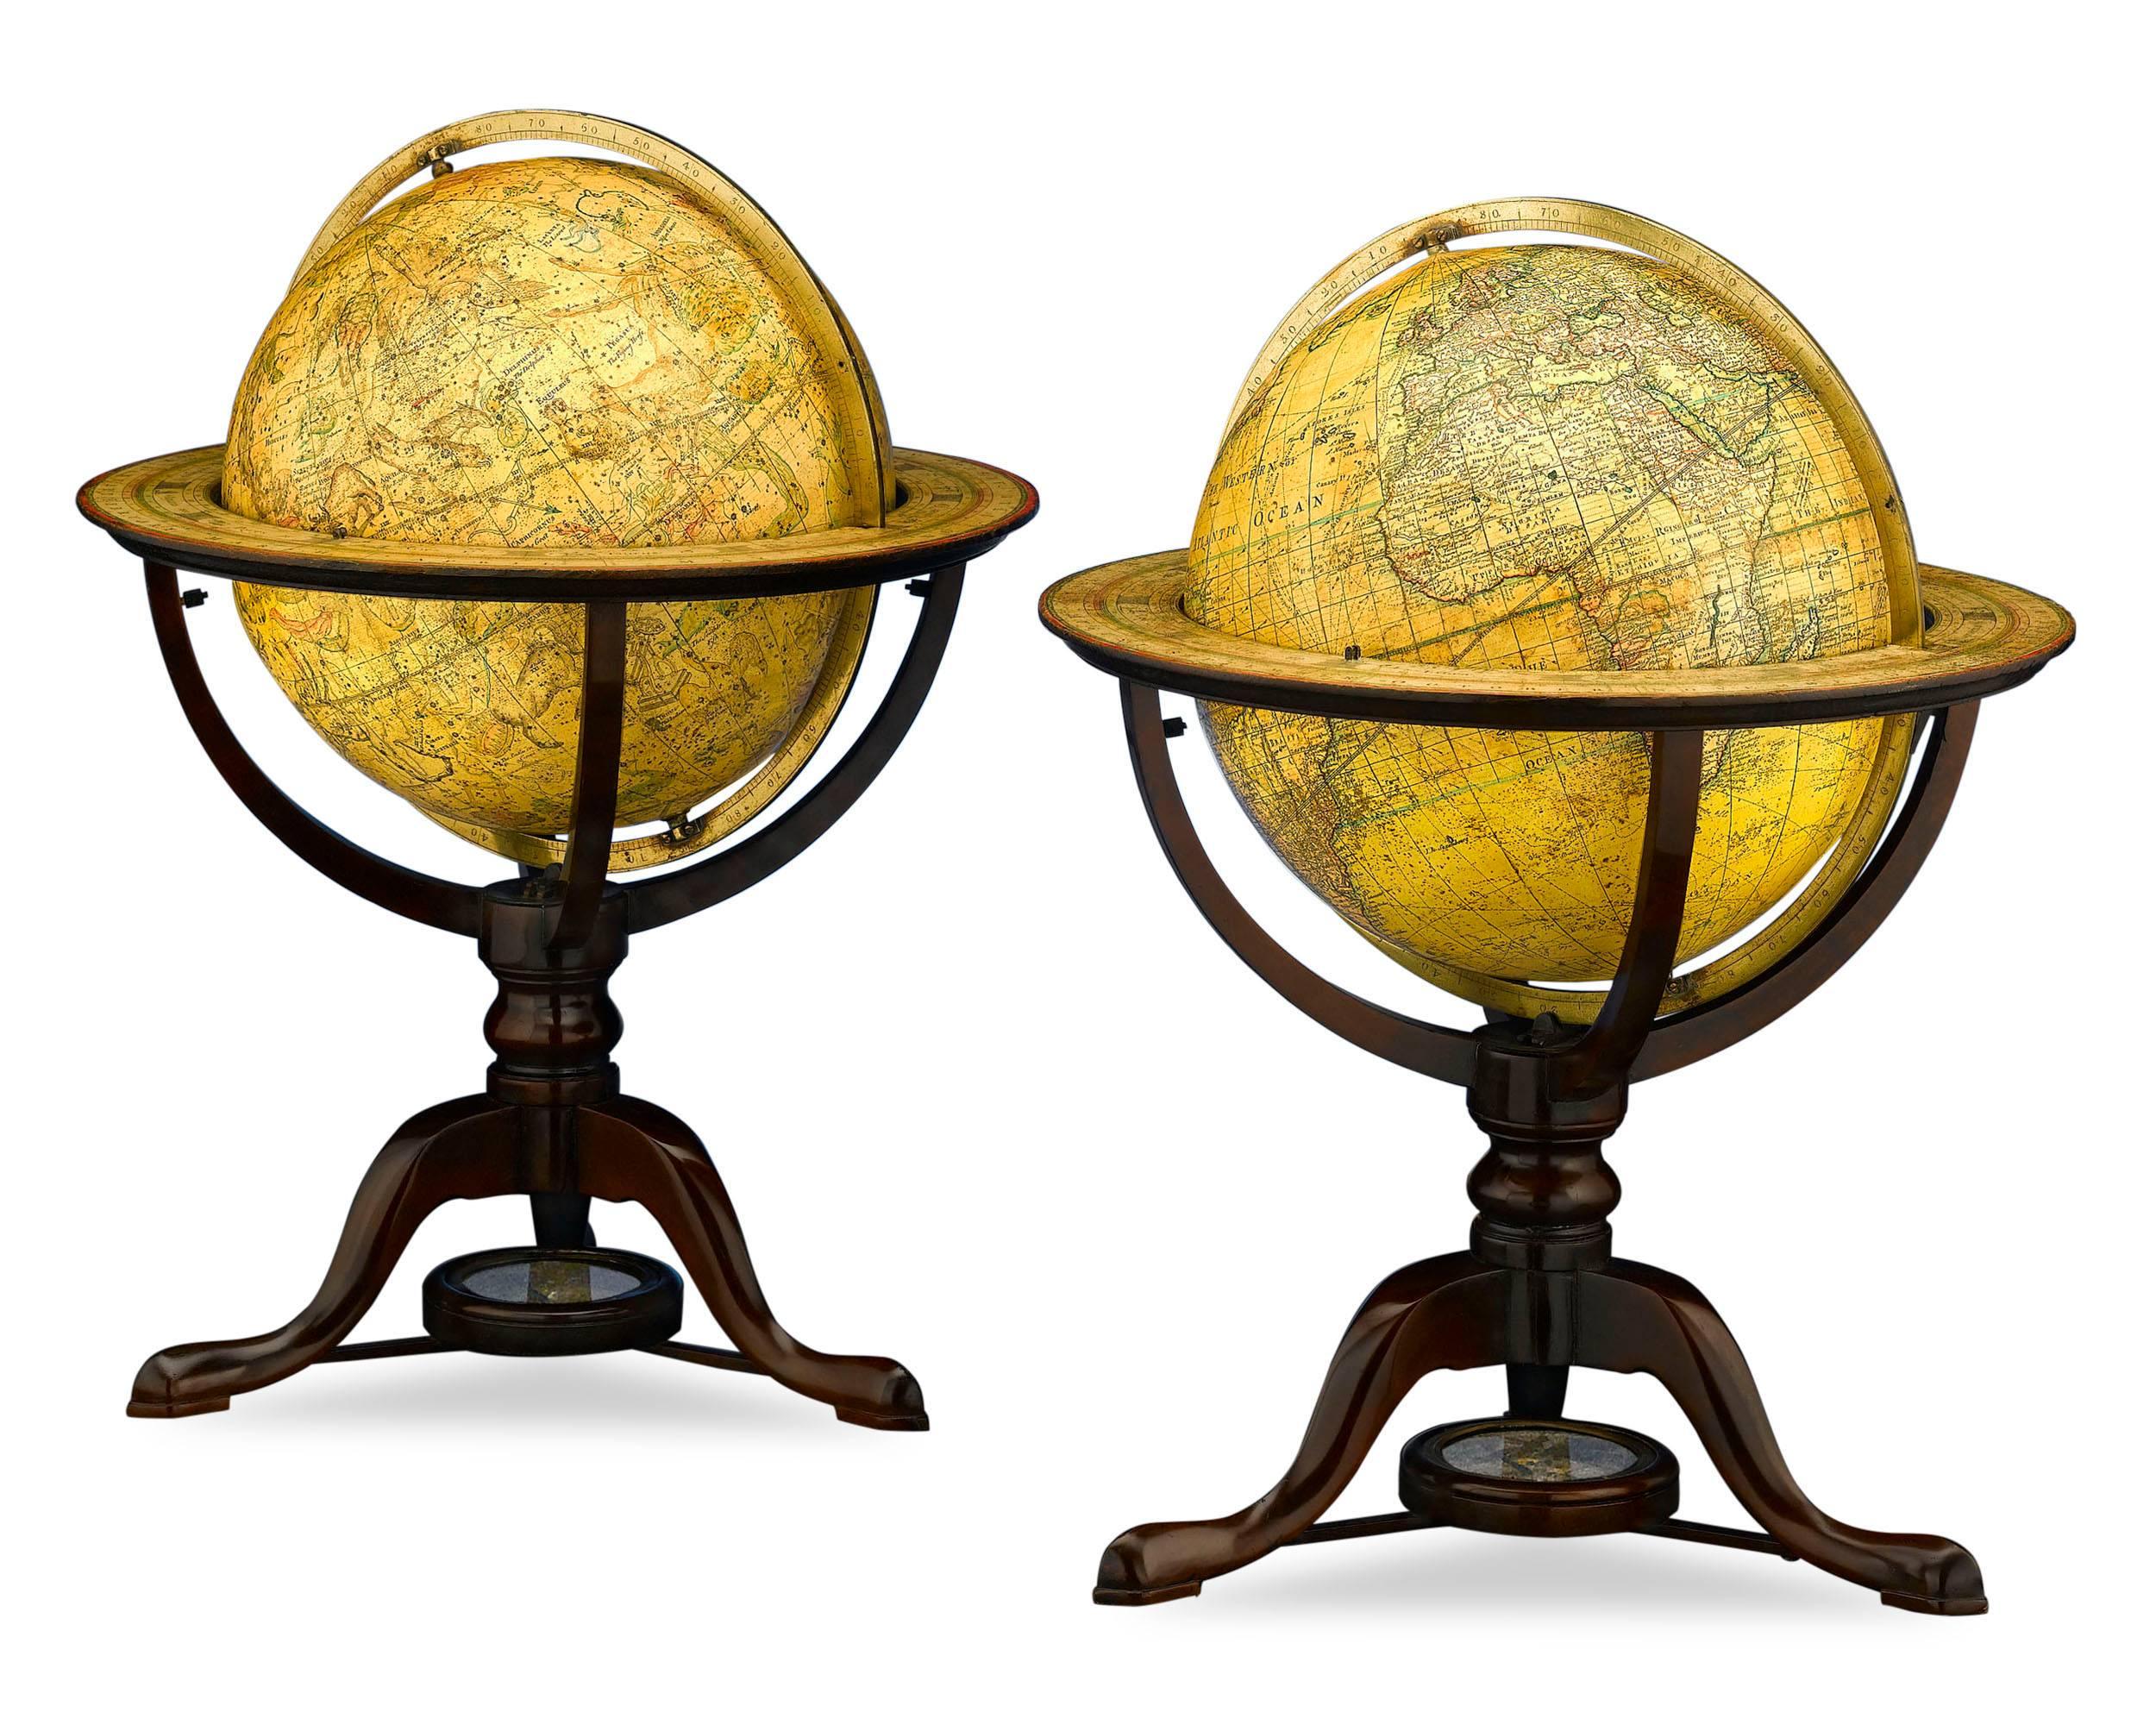 A fine pair of George III-period, 12-inch celestial and terrestrial globes by Dudley Adams, son of the noted George Adams of London. Each bears the hallmarks of advanced mathematical and cartographic notations of the day for which the Adams firm was